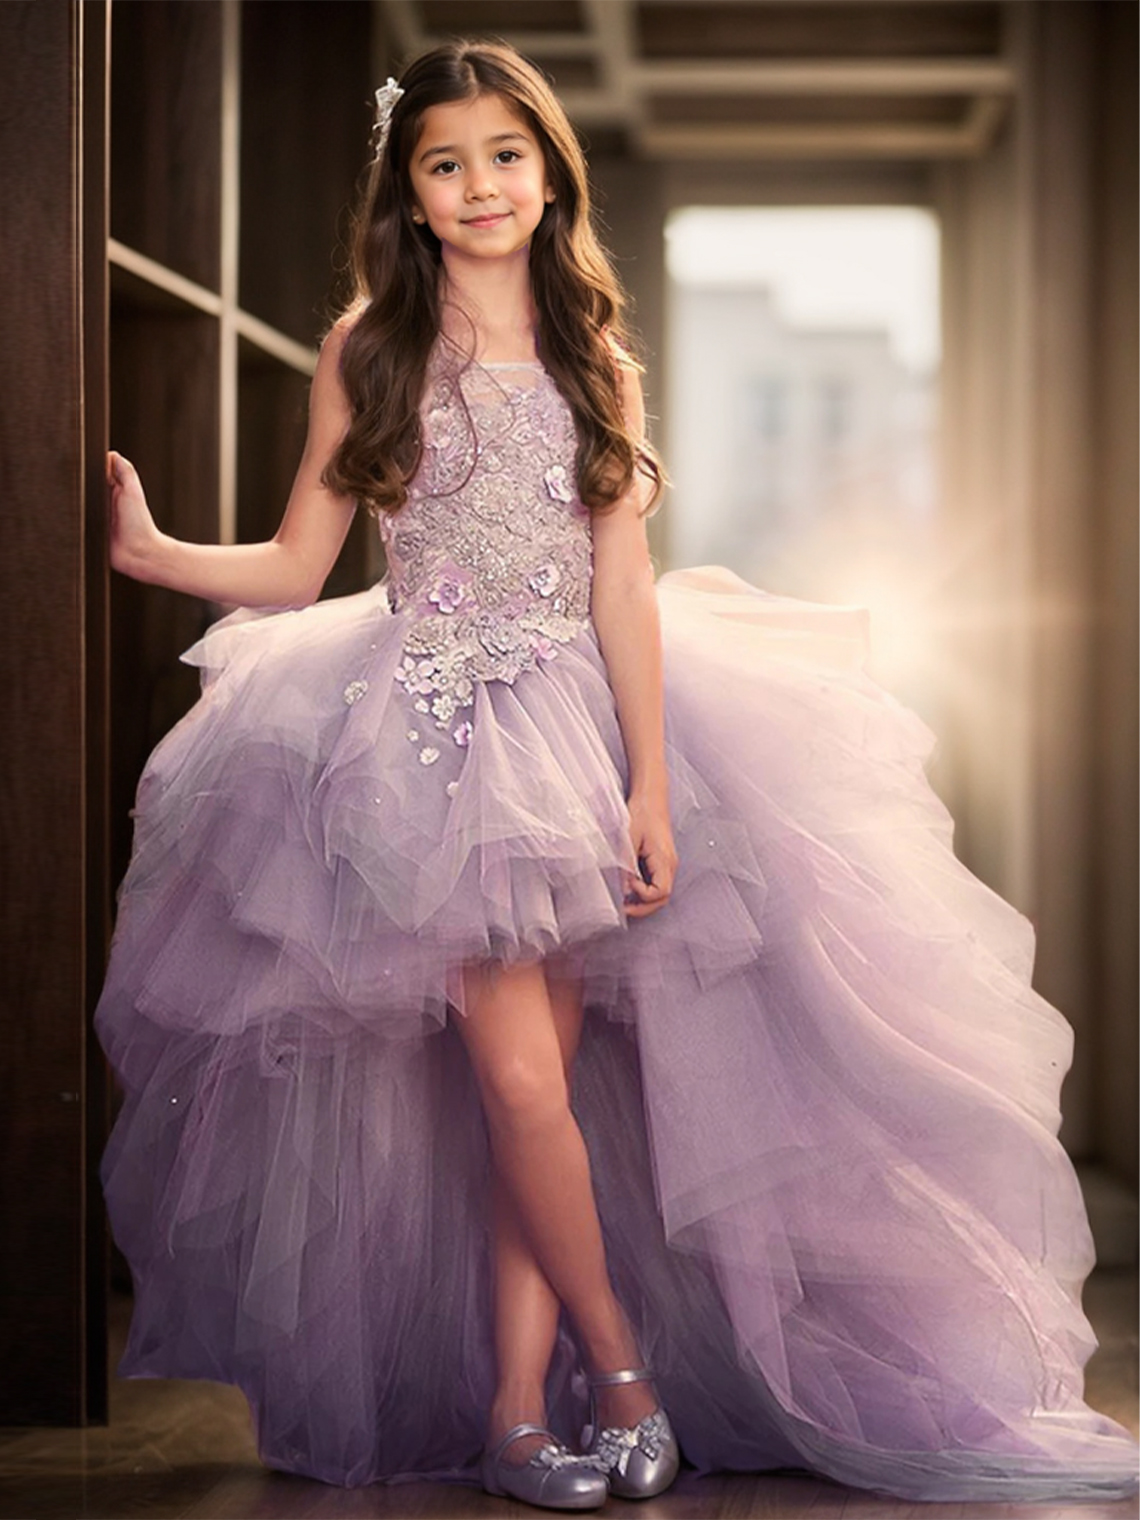 A-Line Asymmetrical Illusion Neck With Appliques Flower Girl Dress